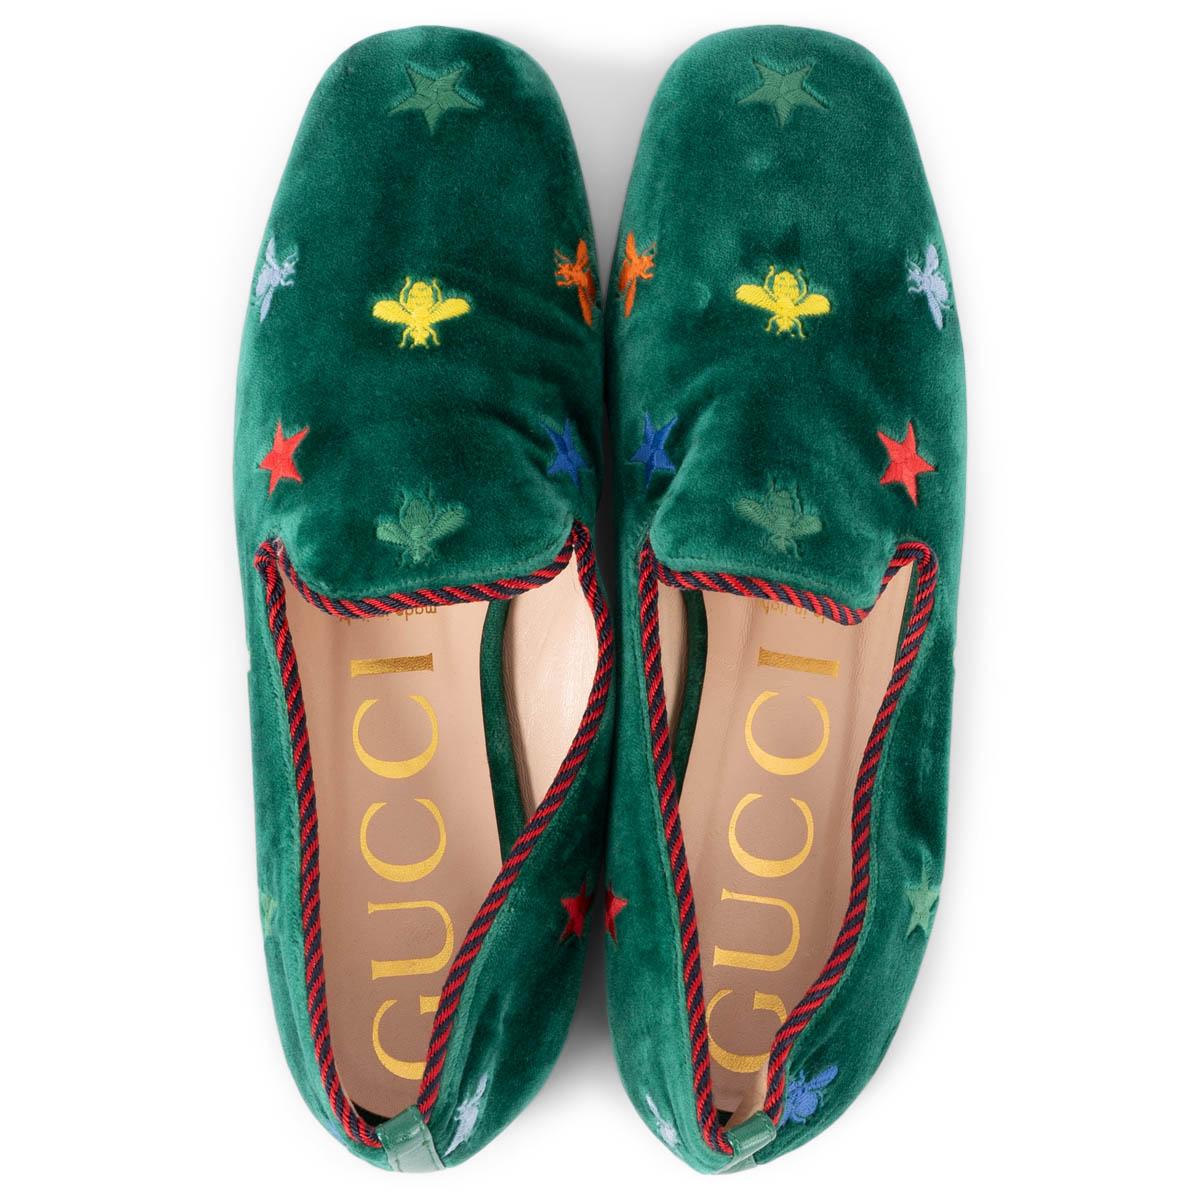 GUCCI green velvet KIBI EMBROIDERED Loafers Shoes 38 1